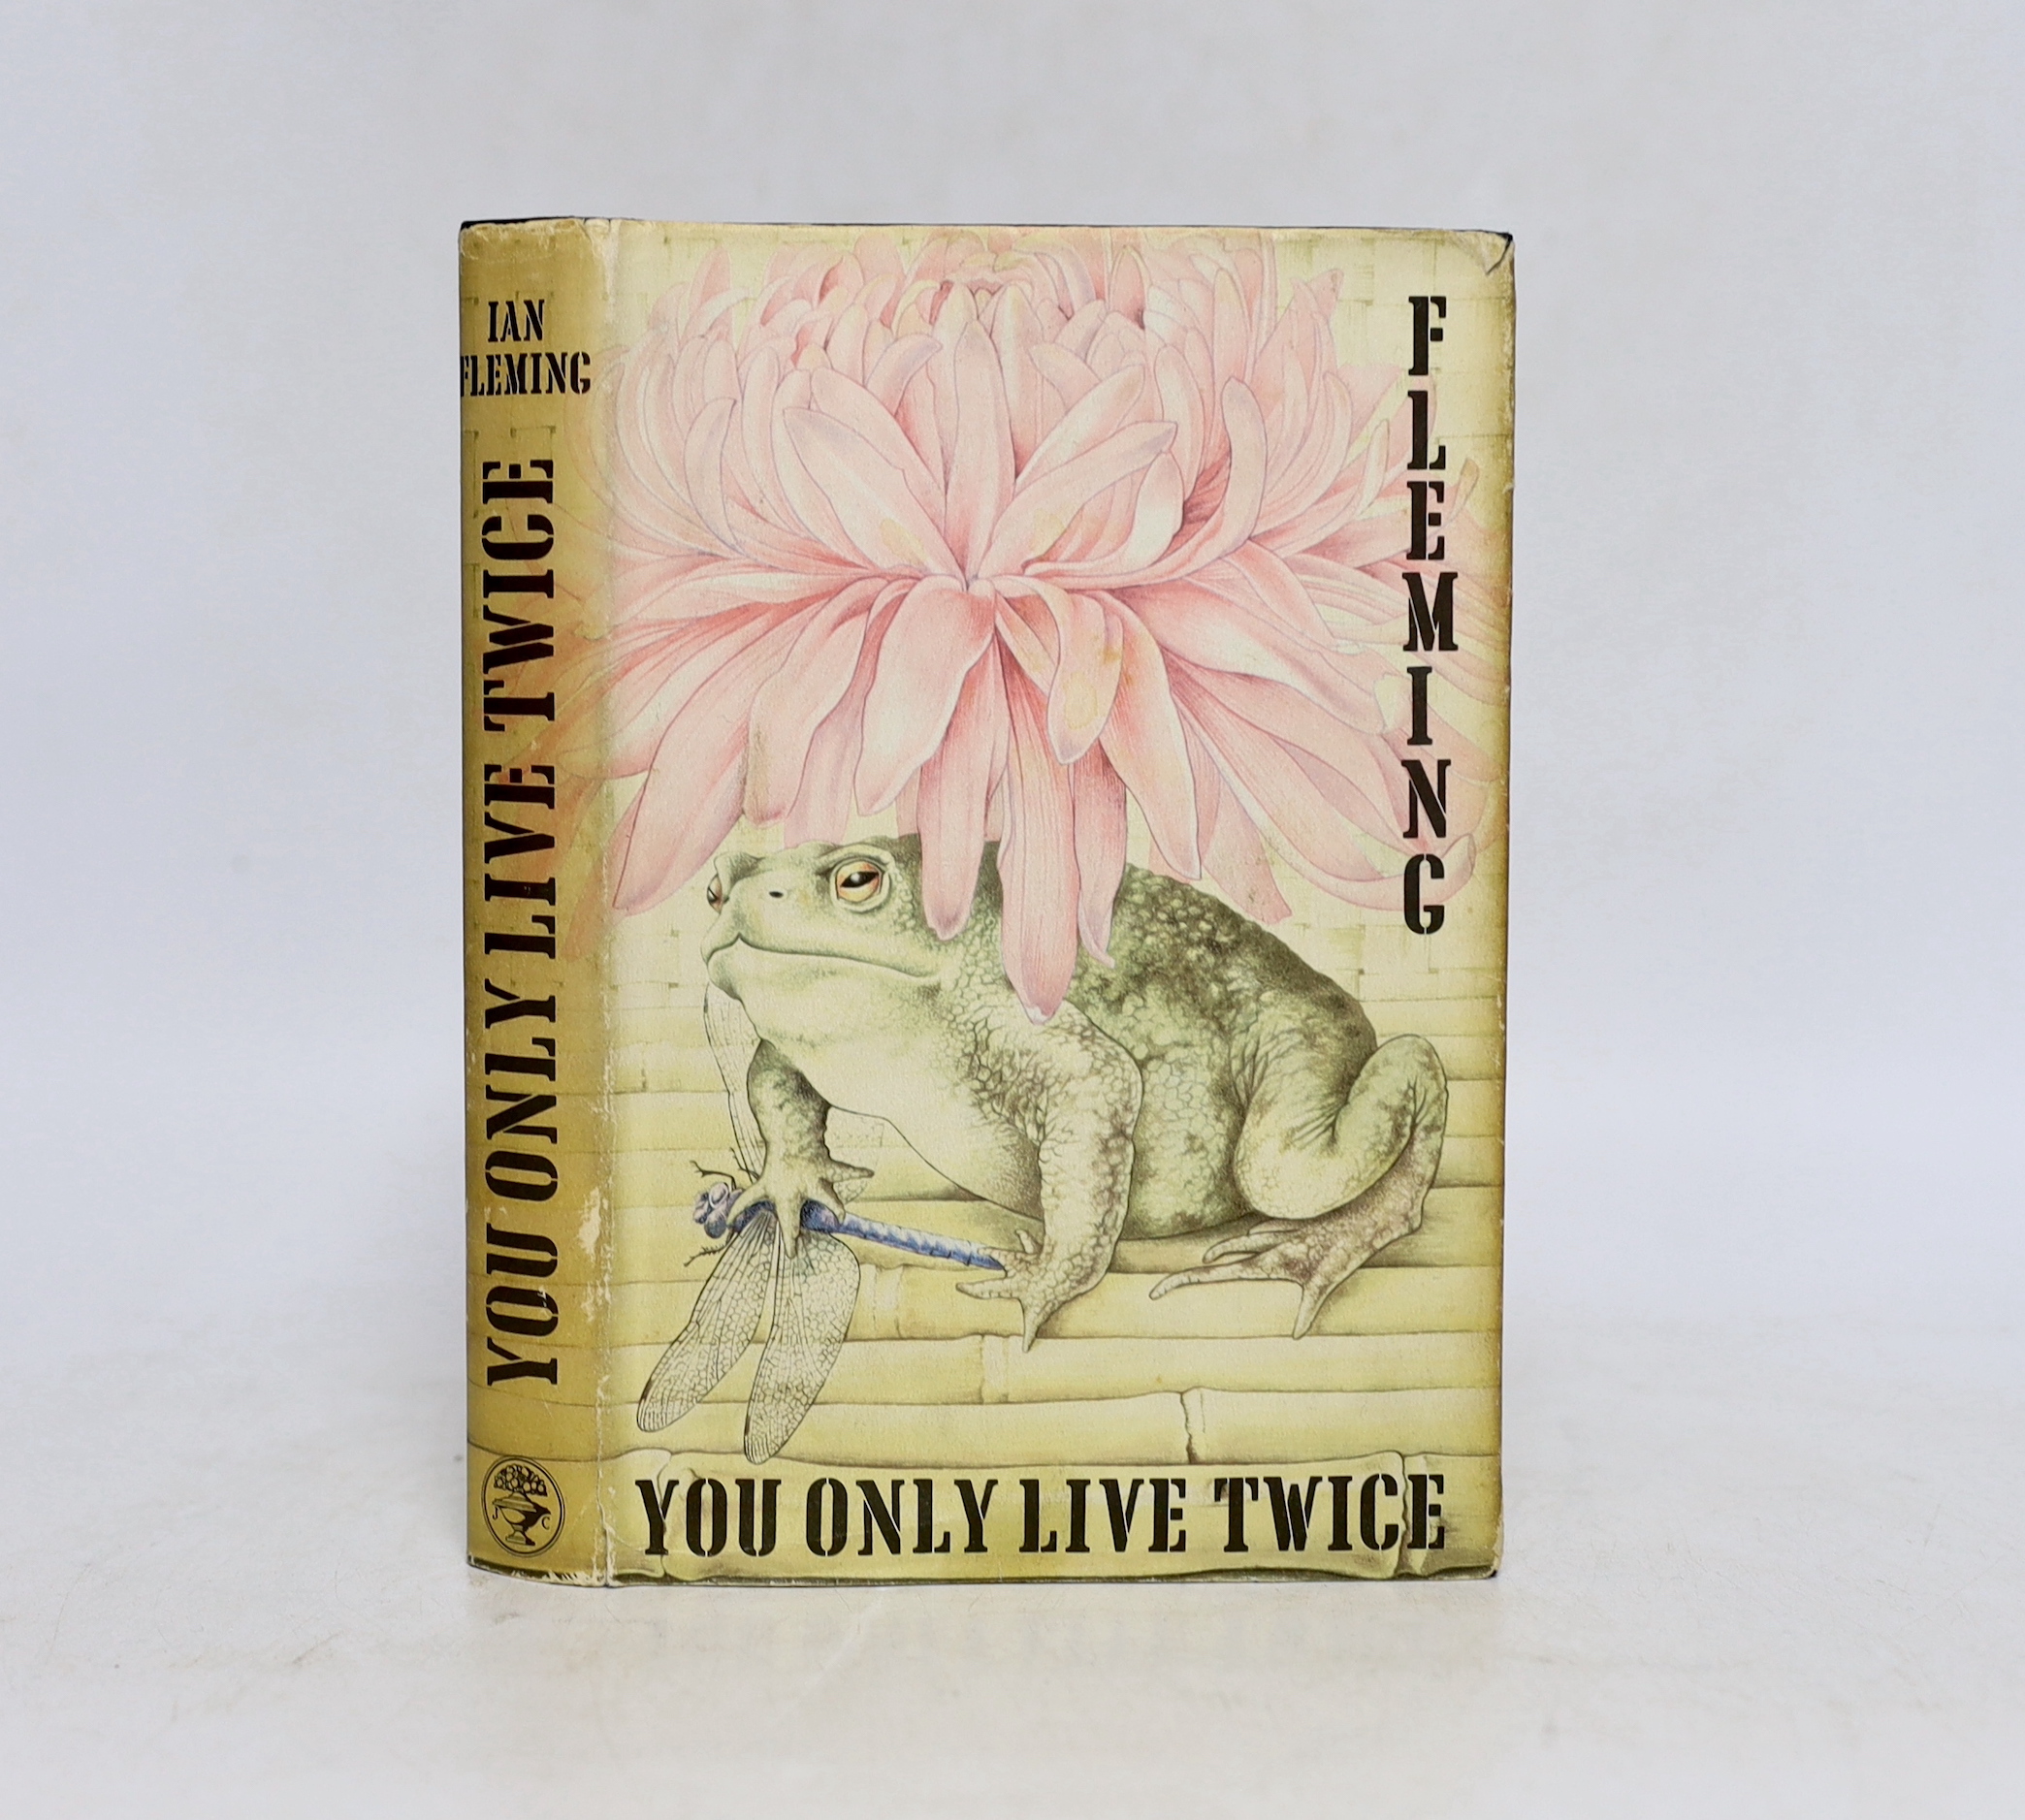 Ian Fleming, You Only Live Twice, first edition with dust jacket, 1964